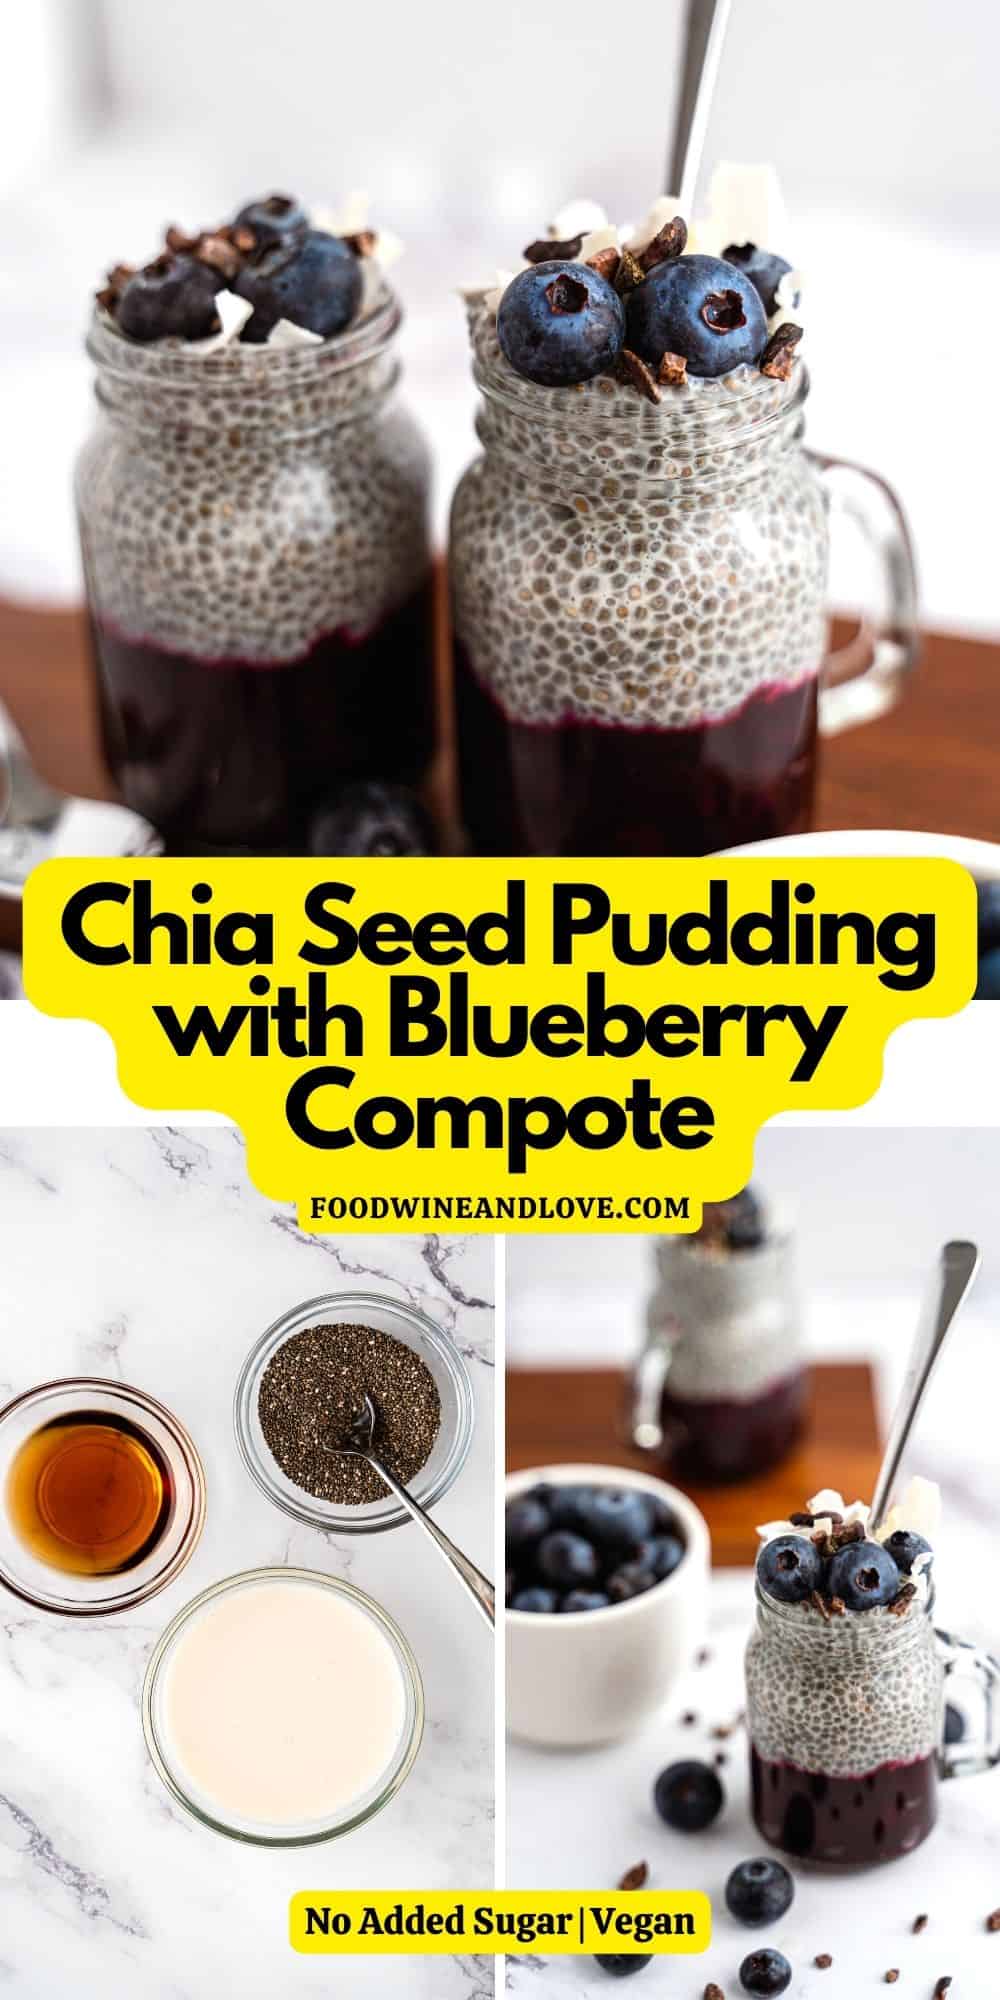 Chia Seed Pudding with Blueberry Compote, a delicious recipe for three ingredient vegan pudding layered with fruit.